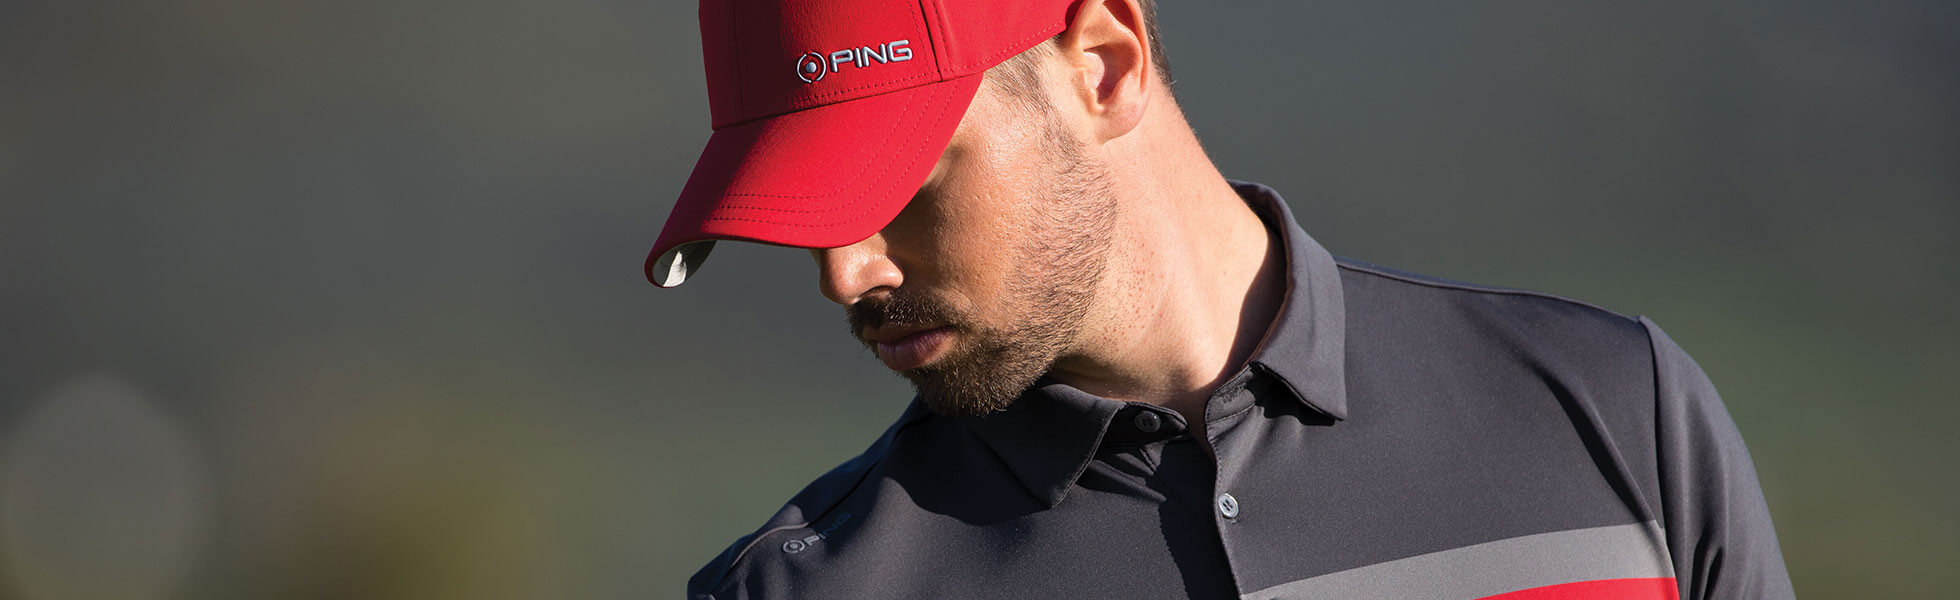 shop the Ping look